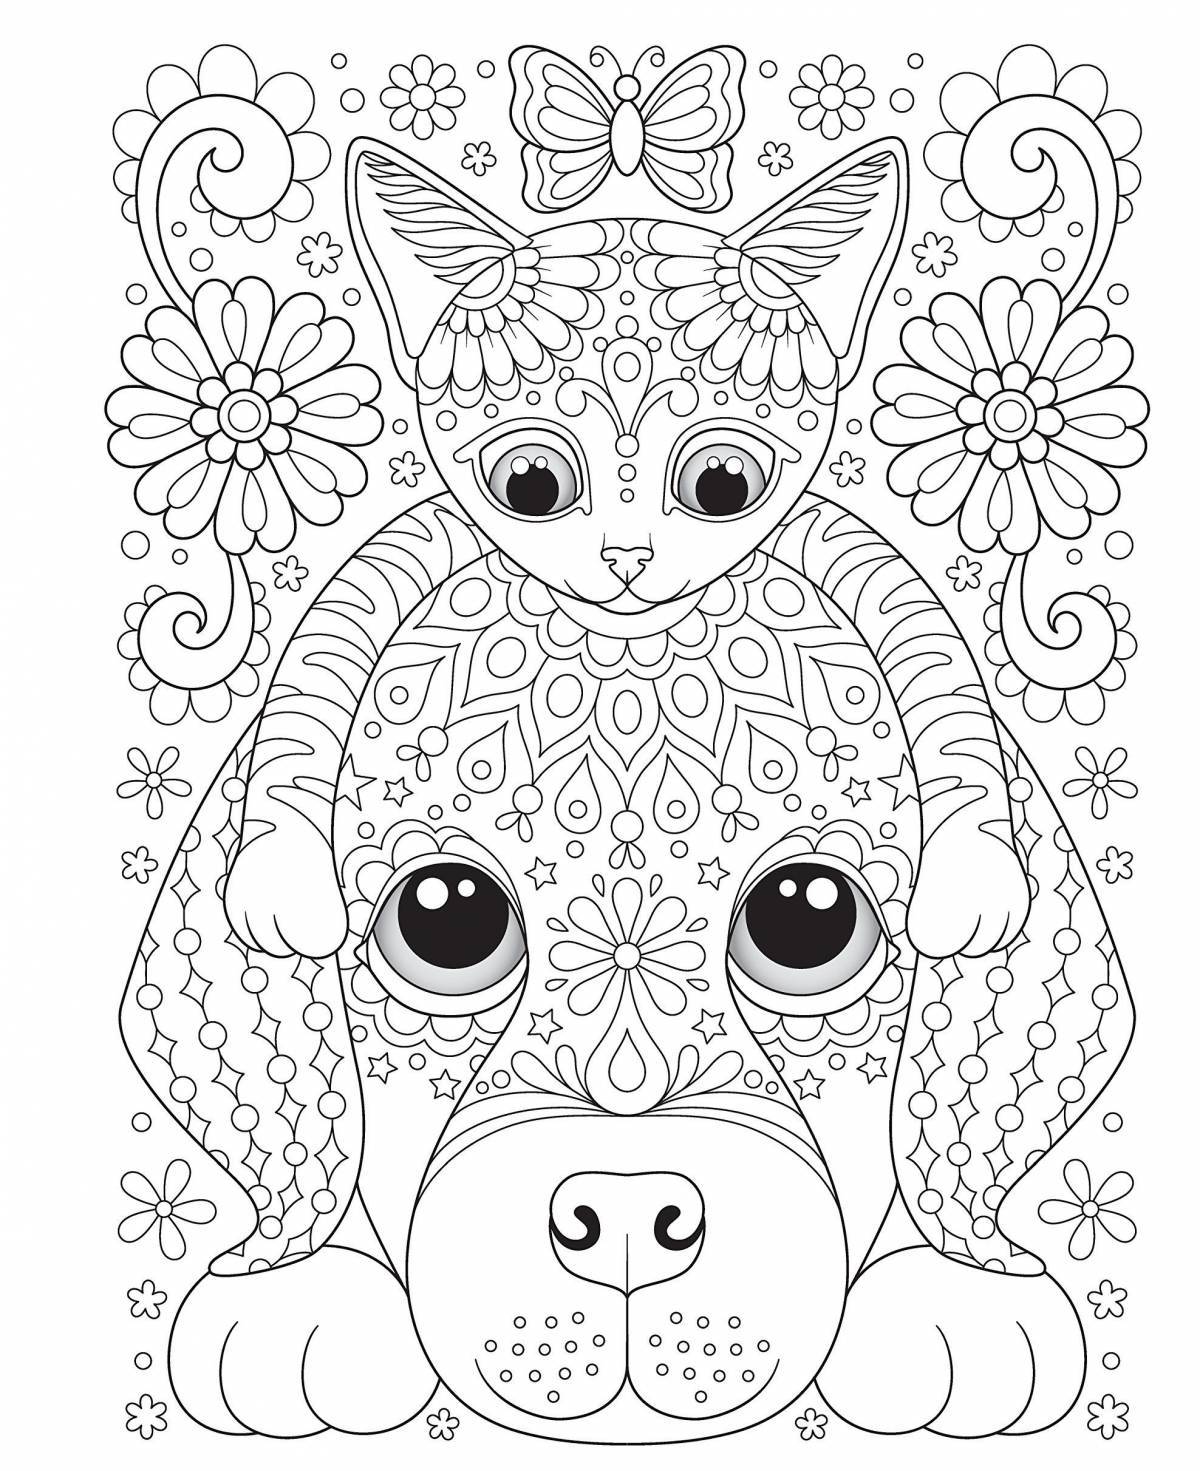 Coloring page new 2020: wild and wonderful